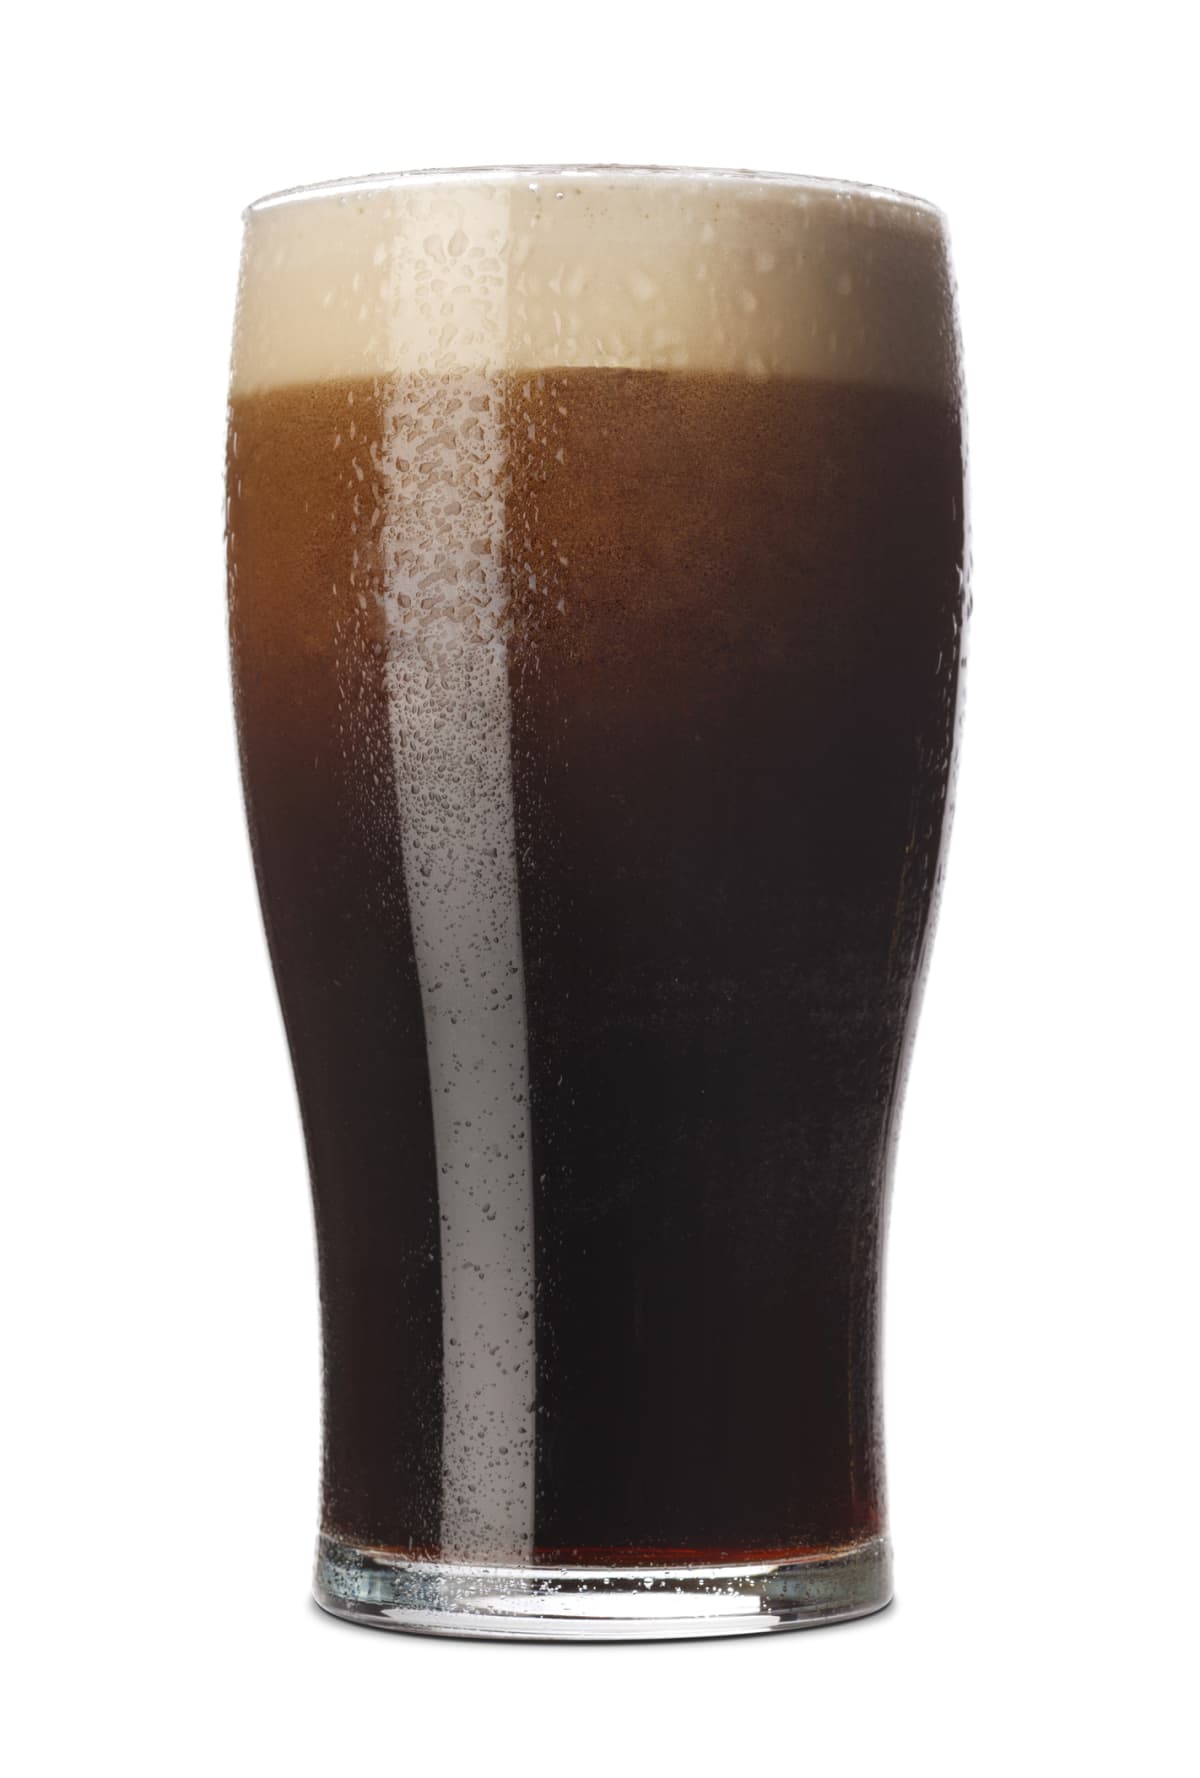 Freshly pulled pint of Stout with its frothy head in a traditional pint glass. Isolated on white with a small shadow